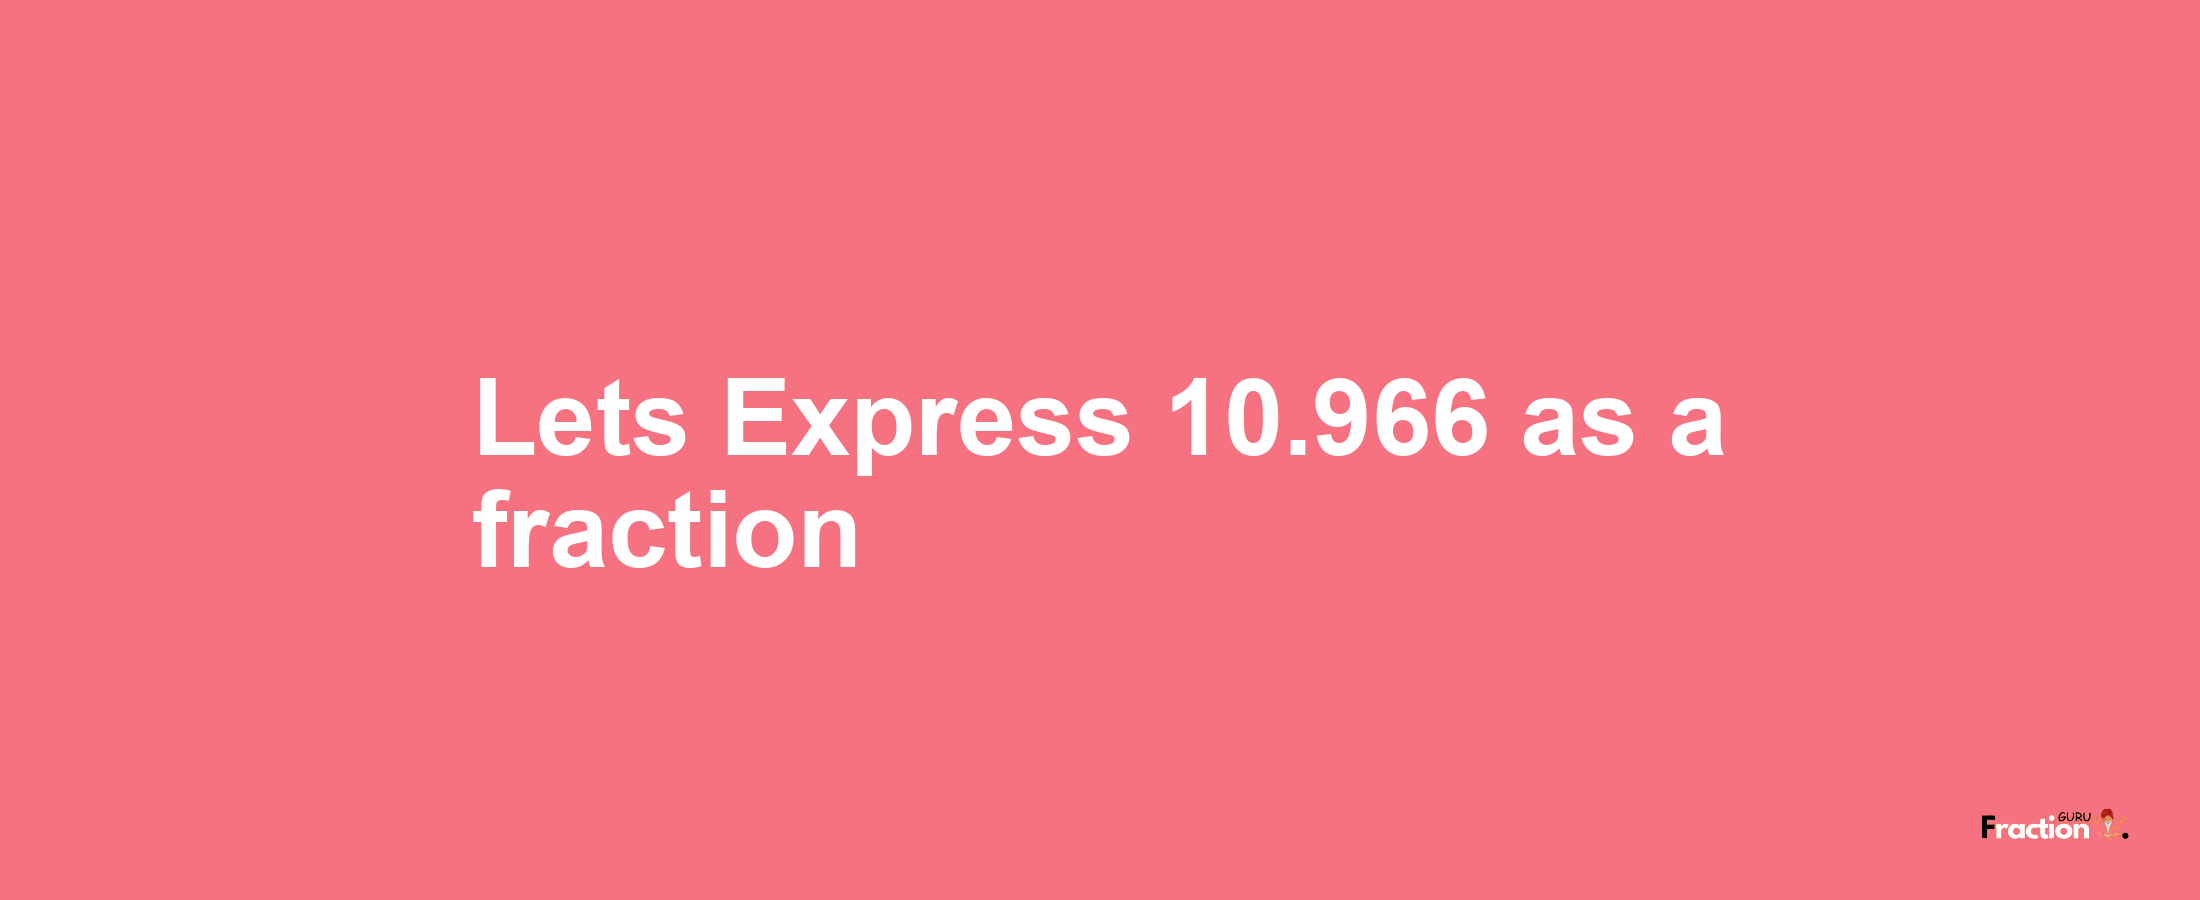 Lets Express 10.966 as afraction